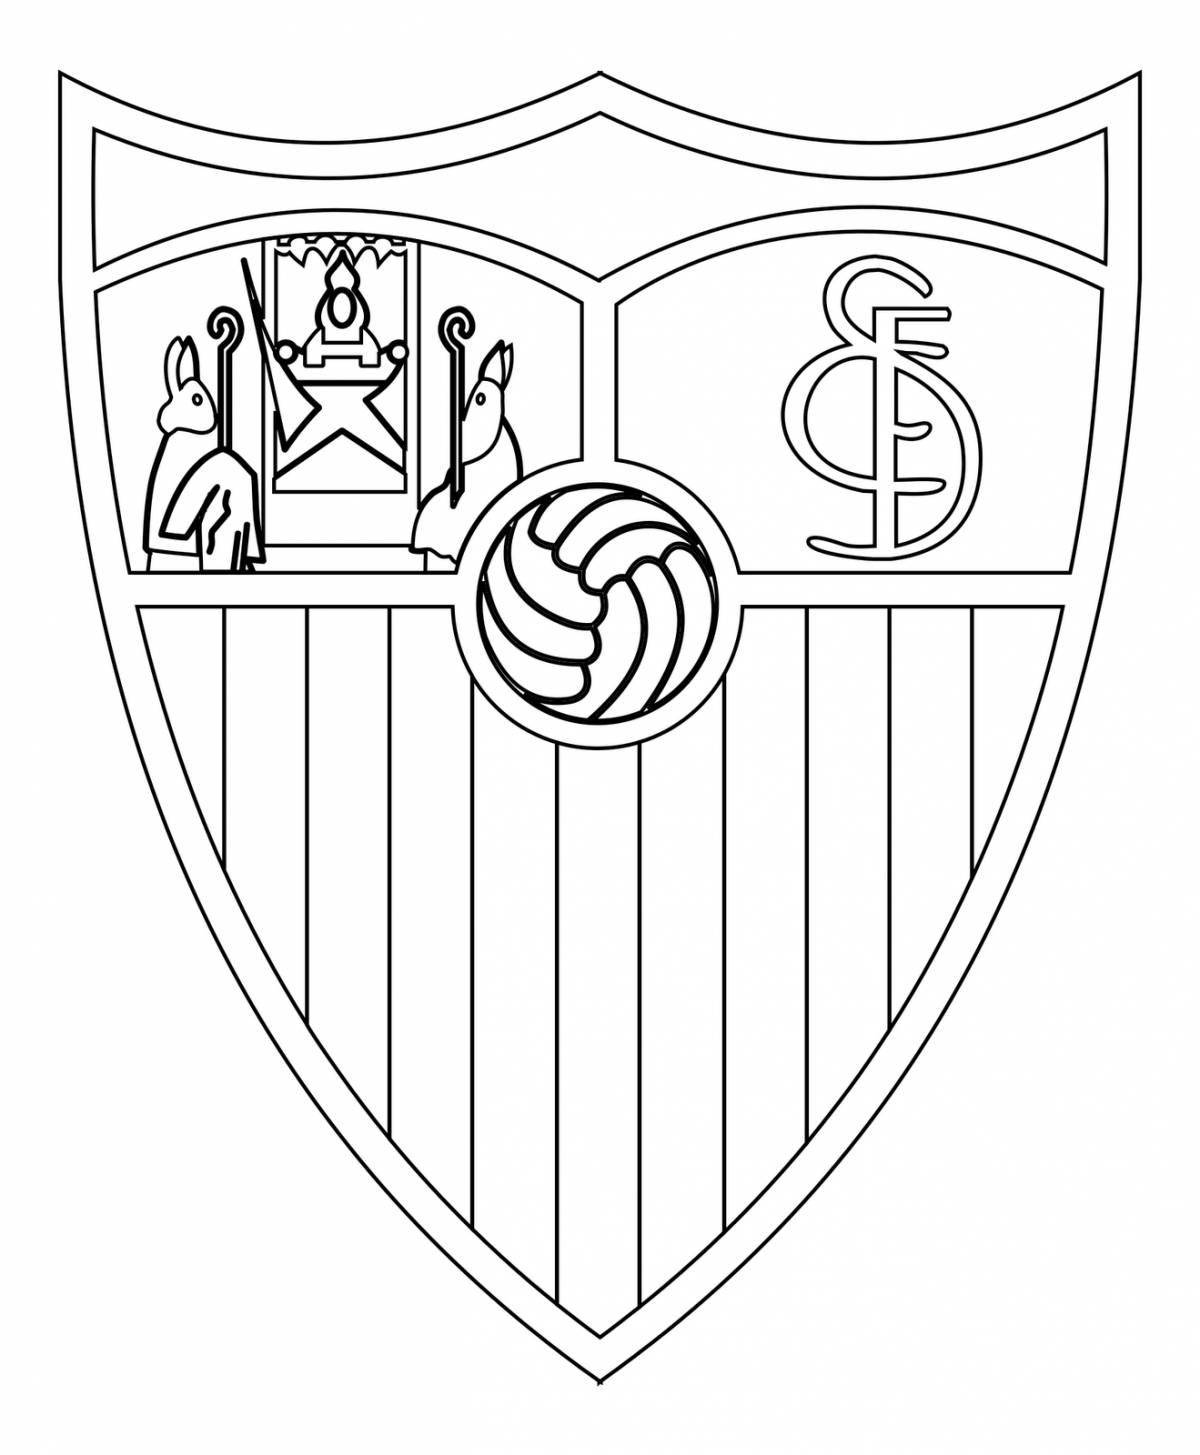 Coloring book with grand barcelona logo